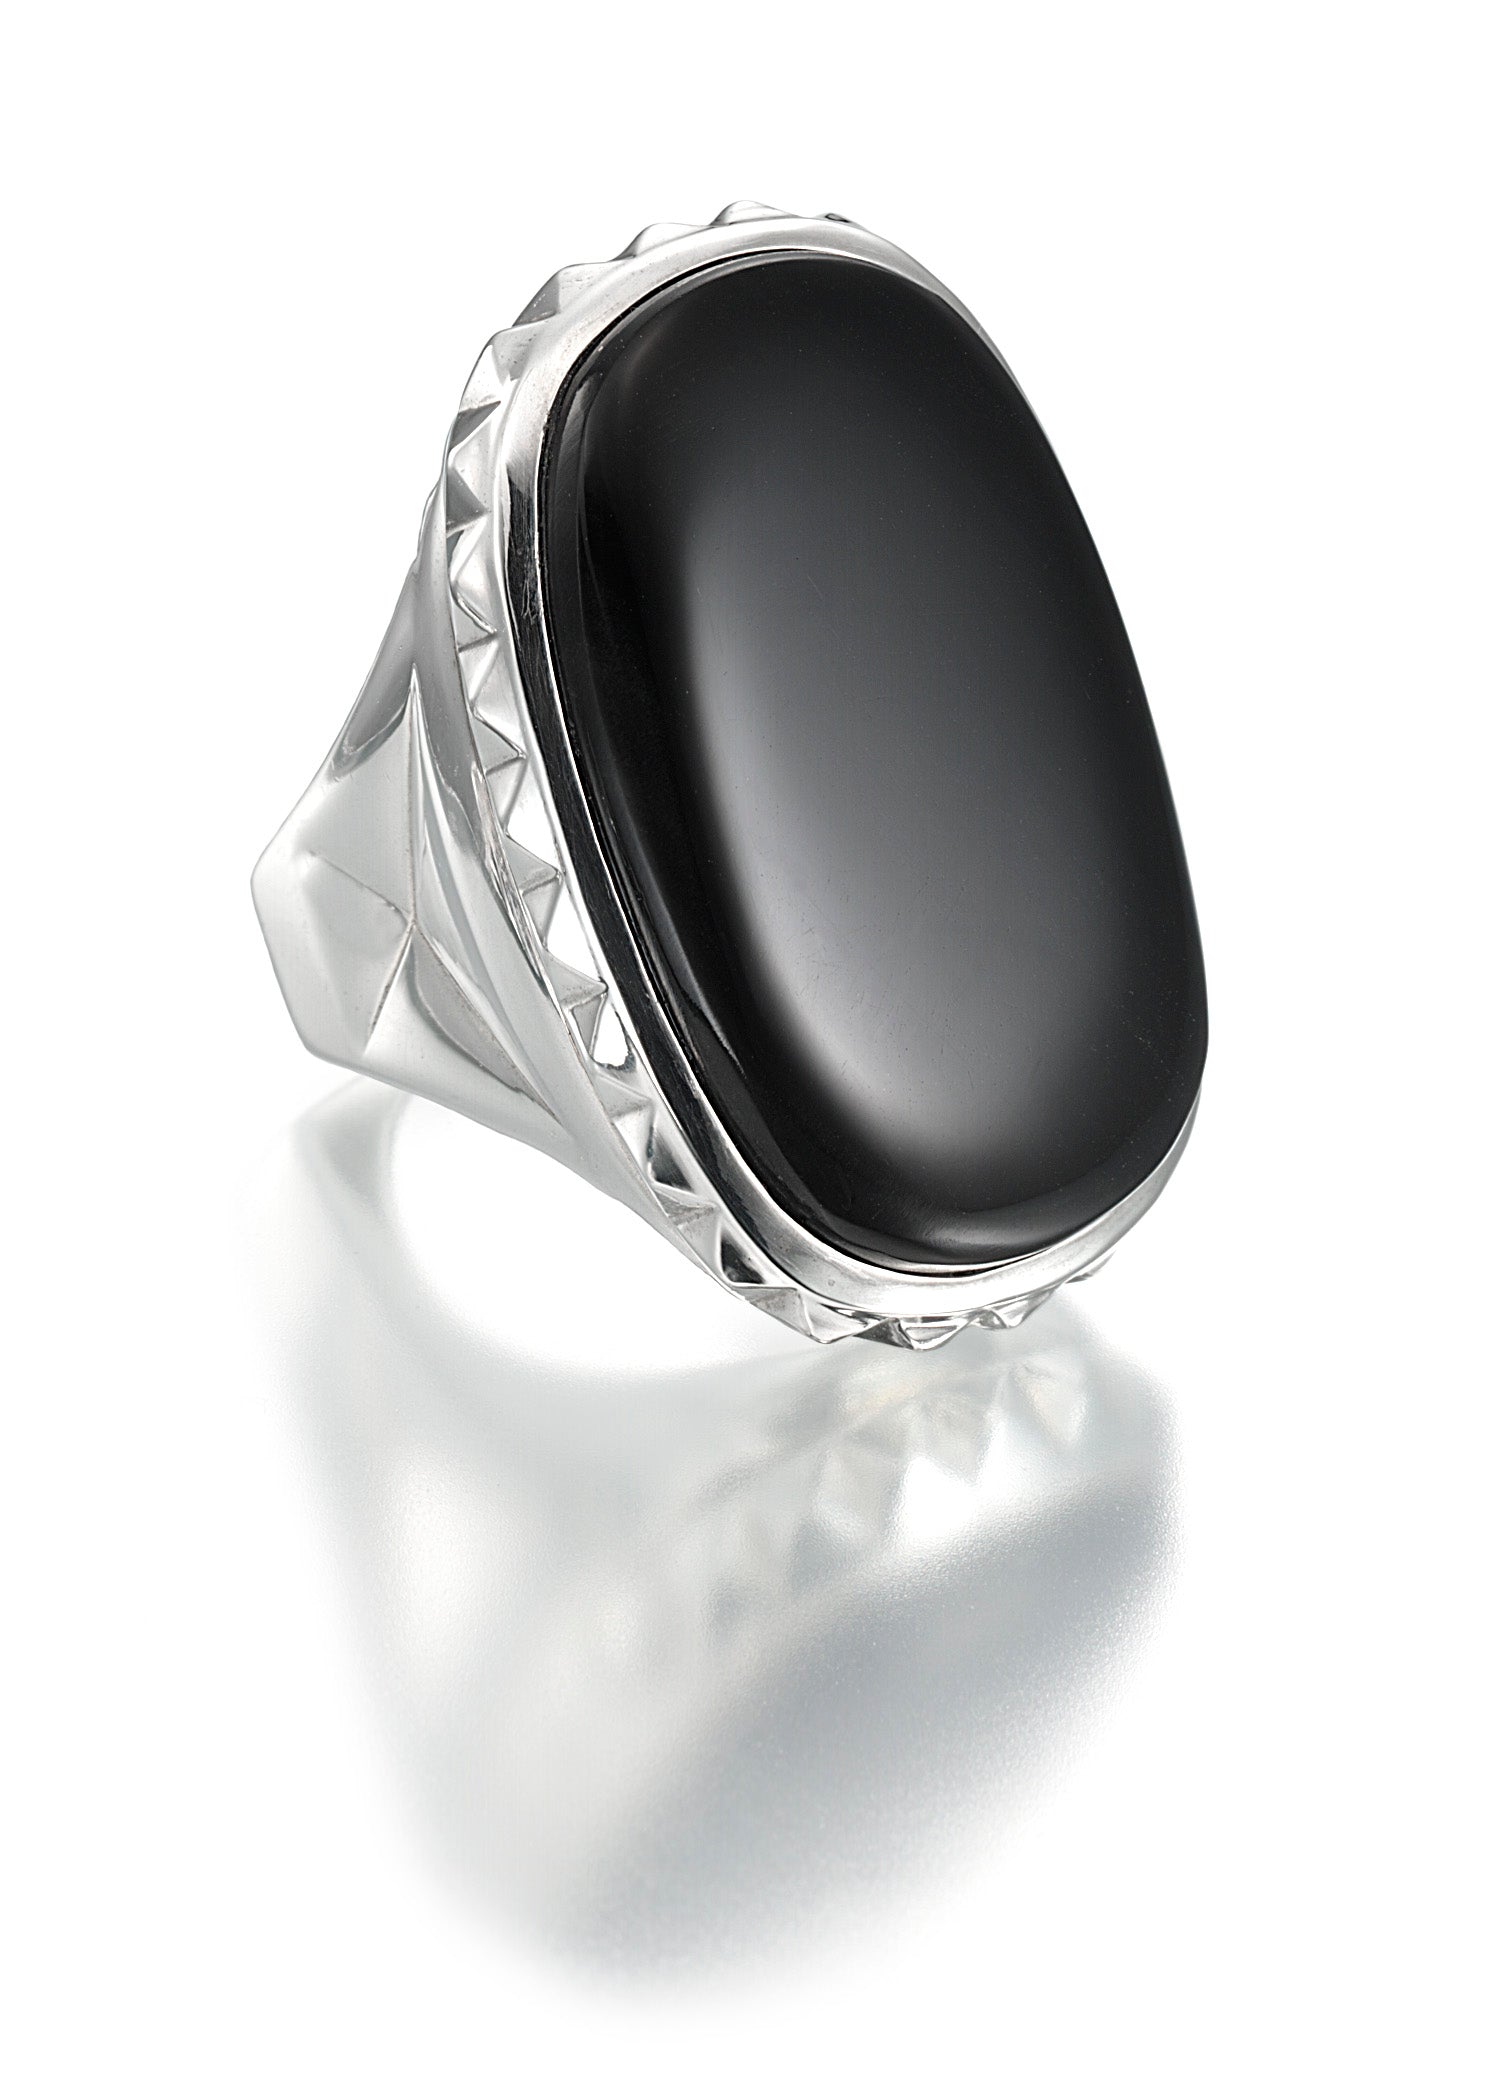 sterling silver ring with black onyx cabochon